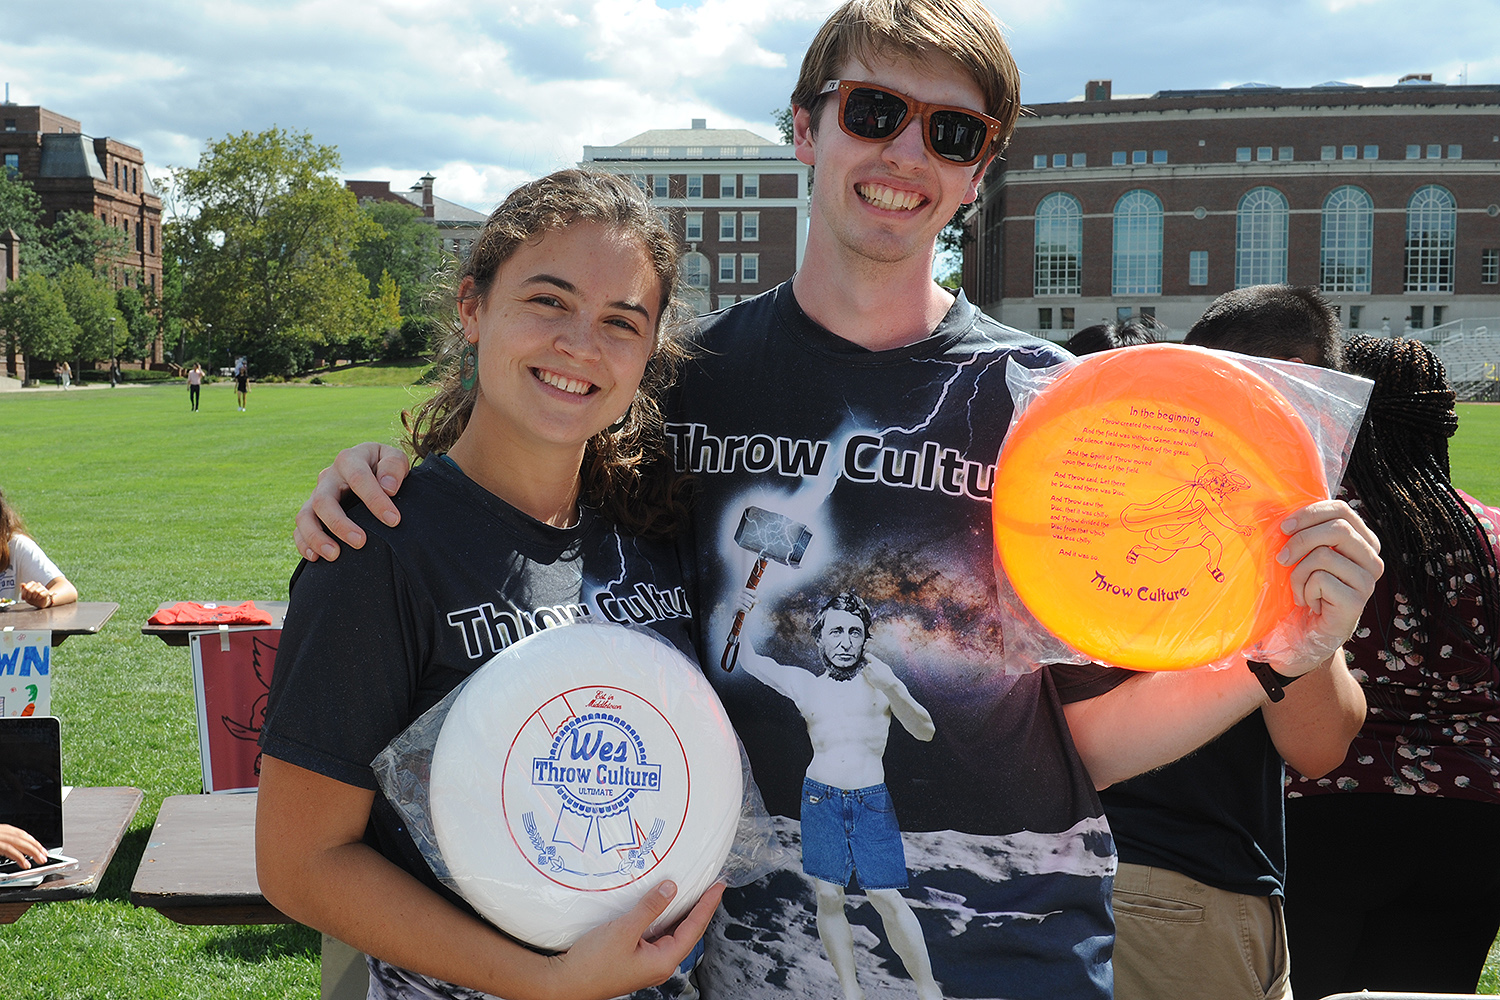 Throw Culture is Wesleyan's mixed ultimate frisbee team. The group has regular practices to prepare for tournaments throughout the year. The team is an open space for everyone to come play and learn ultimate.